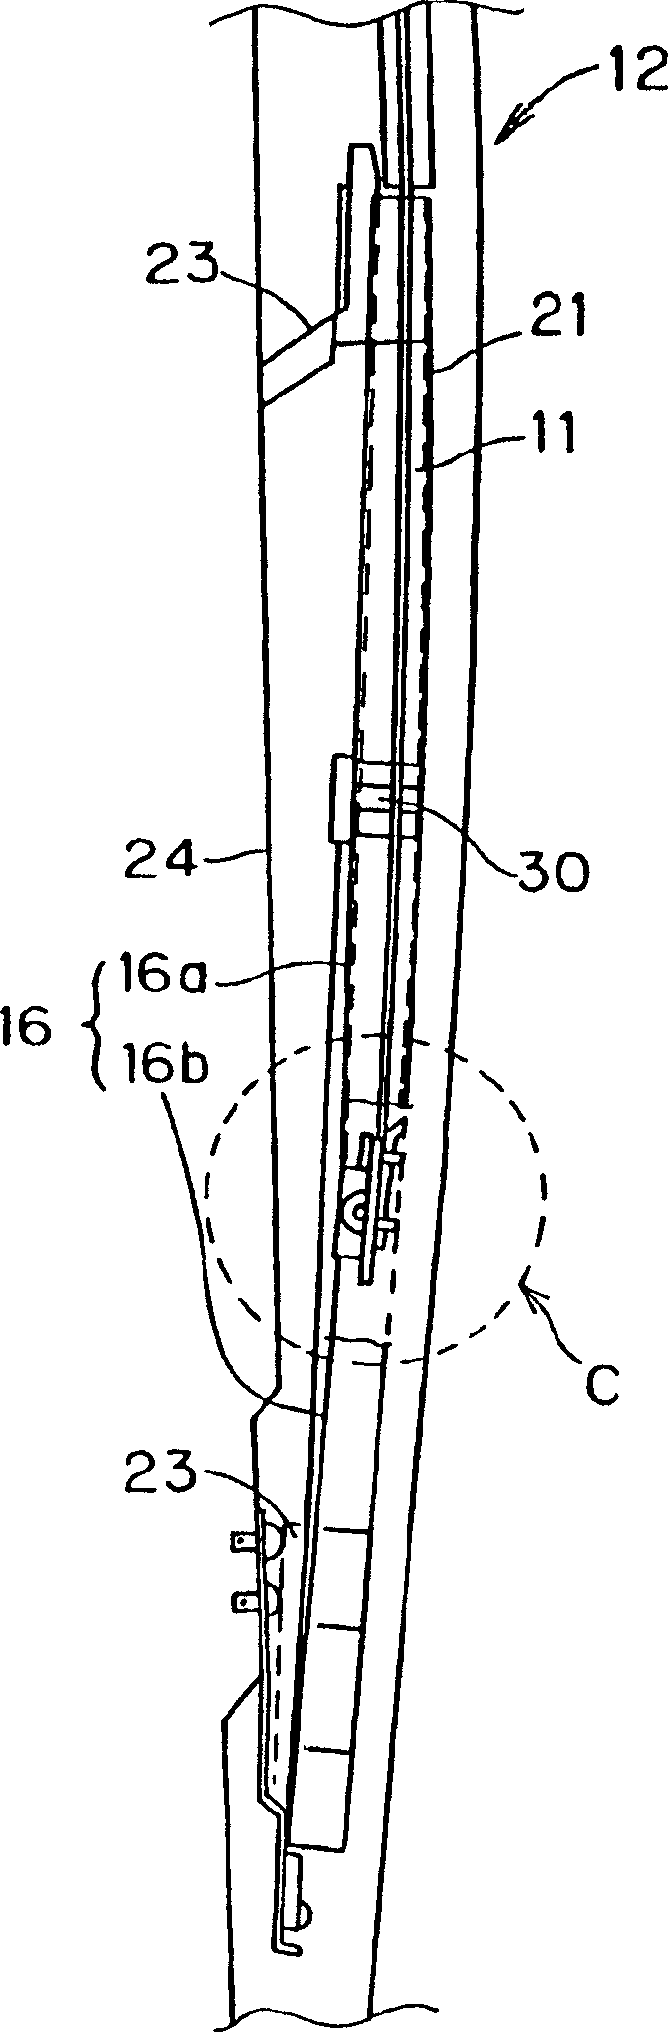 Curved galss support structure and window galss closing-opening regulator